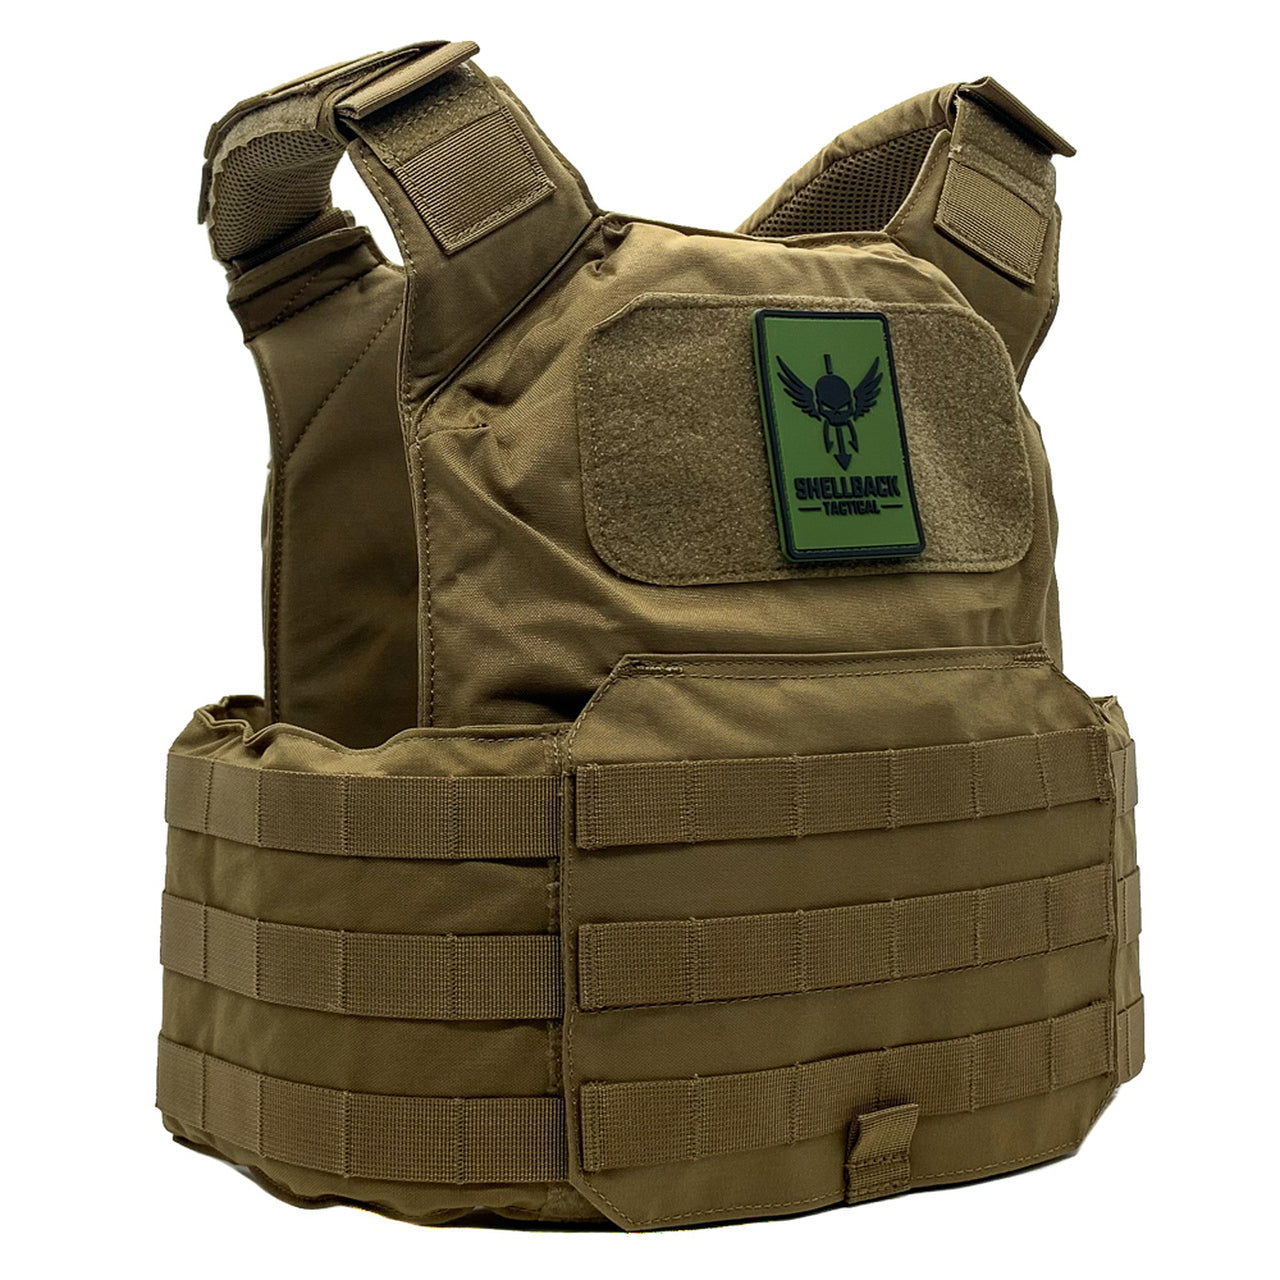 Shellback Tactical Shield Plate Carrier